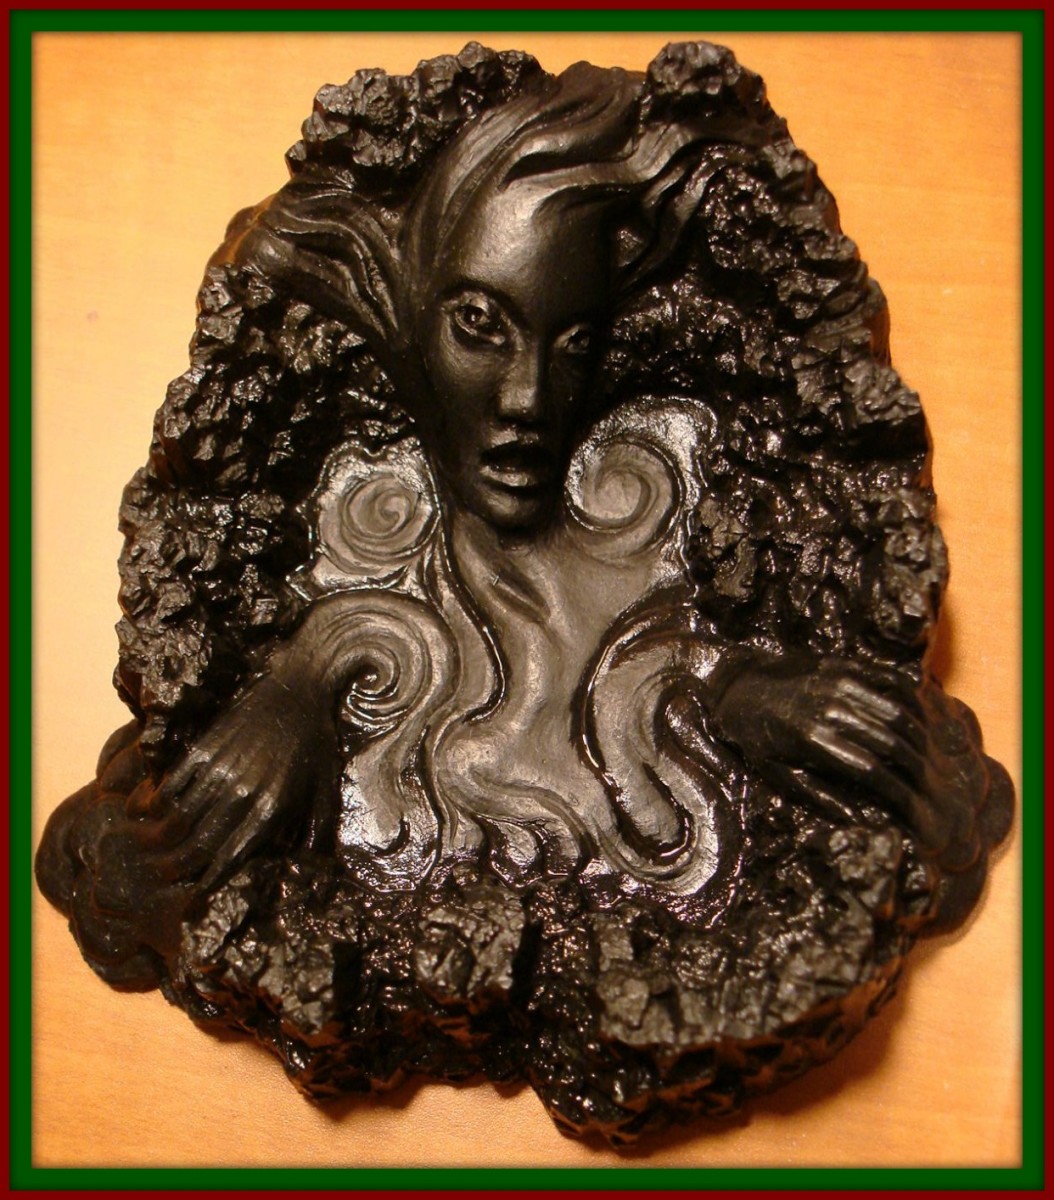 Pele is the Goddess of the volcanoes.  This awesome piece measures approximately 5 inches  long, 4 1/4 inches wide and is 1 1/2 inches in height.  A beautiful work of art.